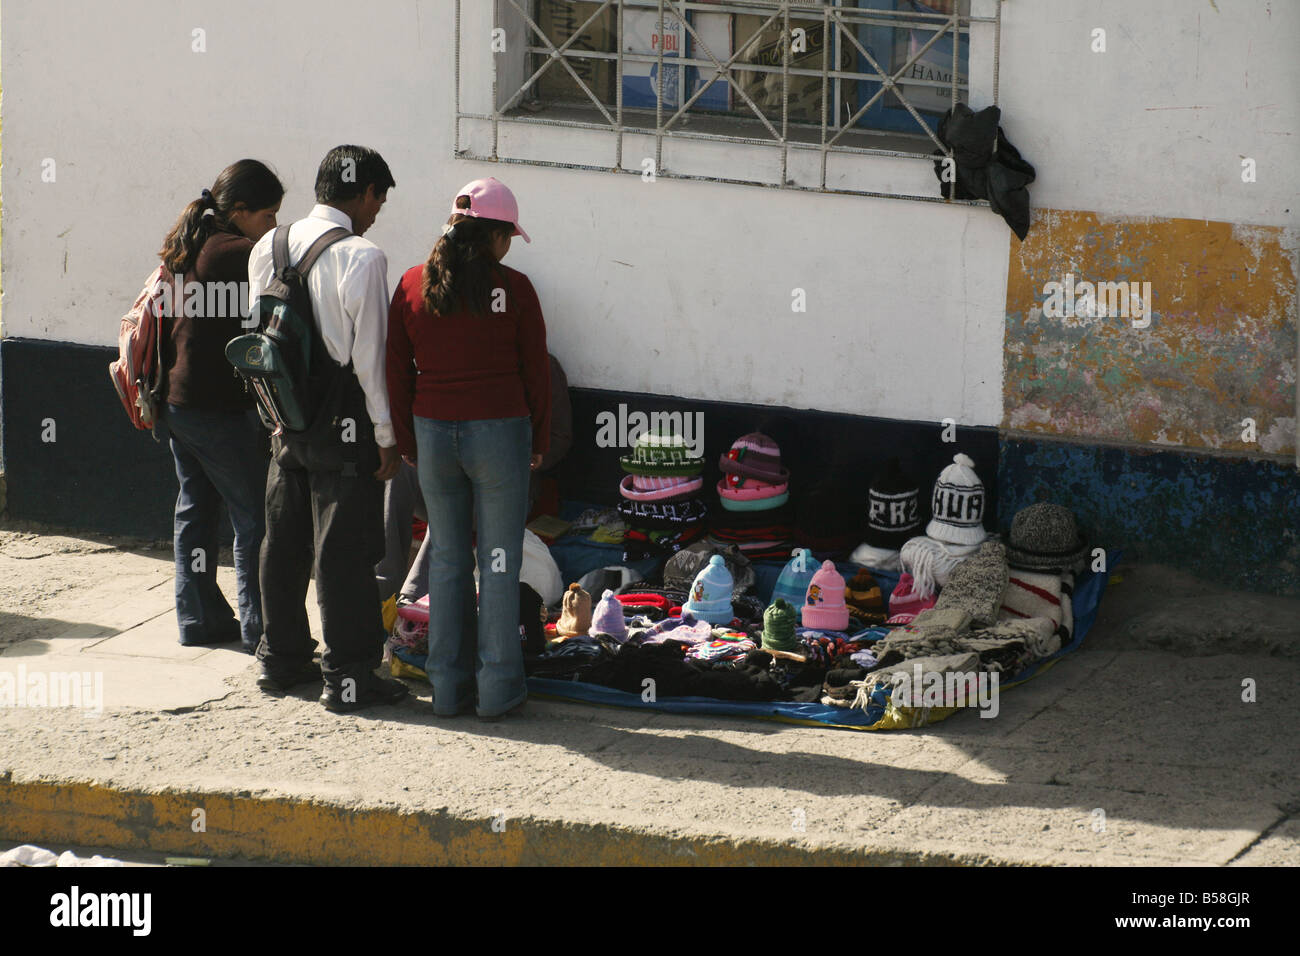 Ethic Handycrafts for Sale on the Streets of Huaraz Stock Photo